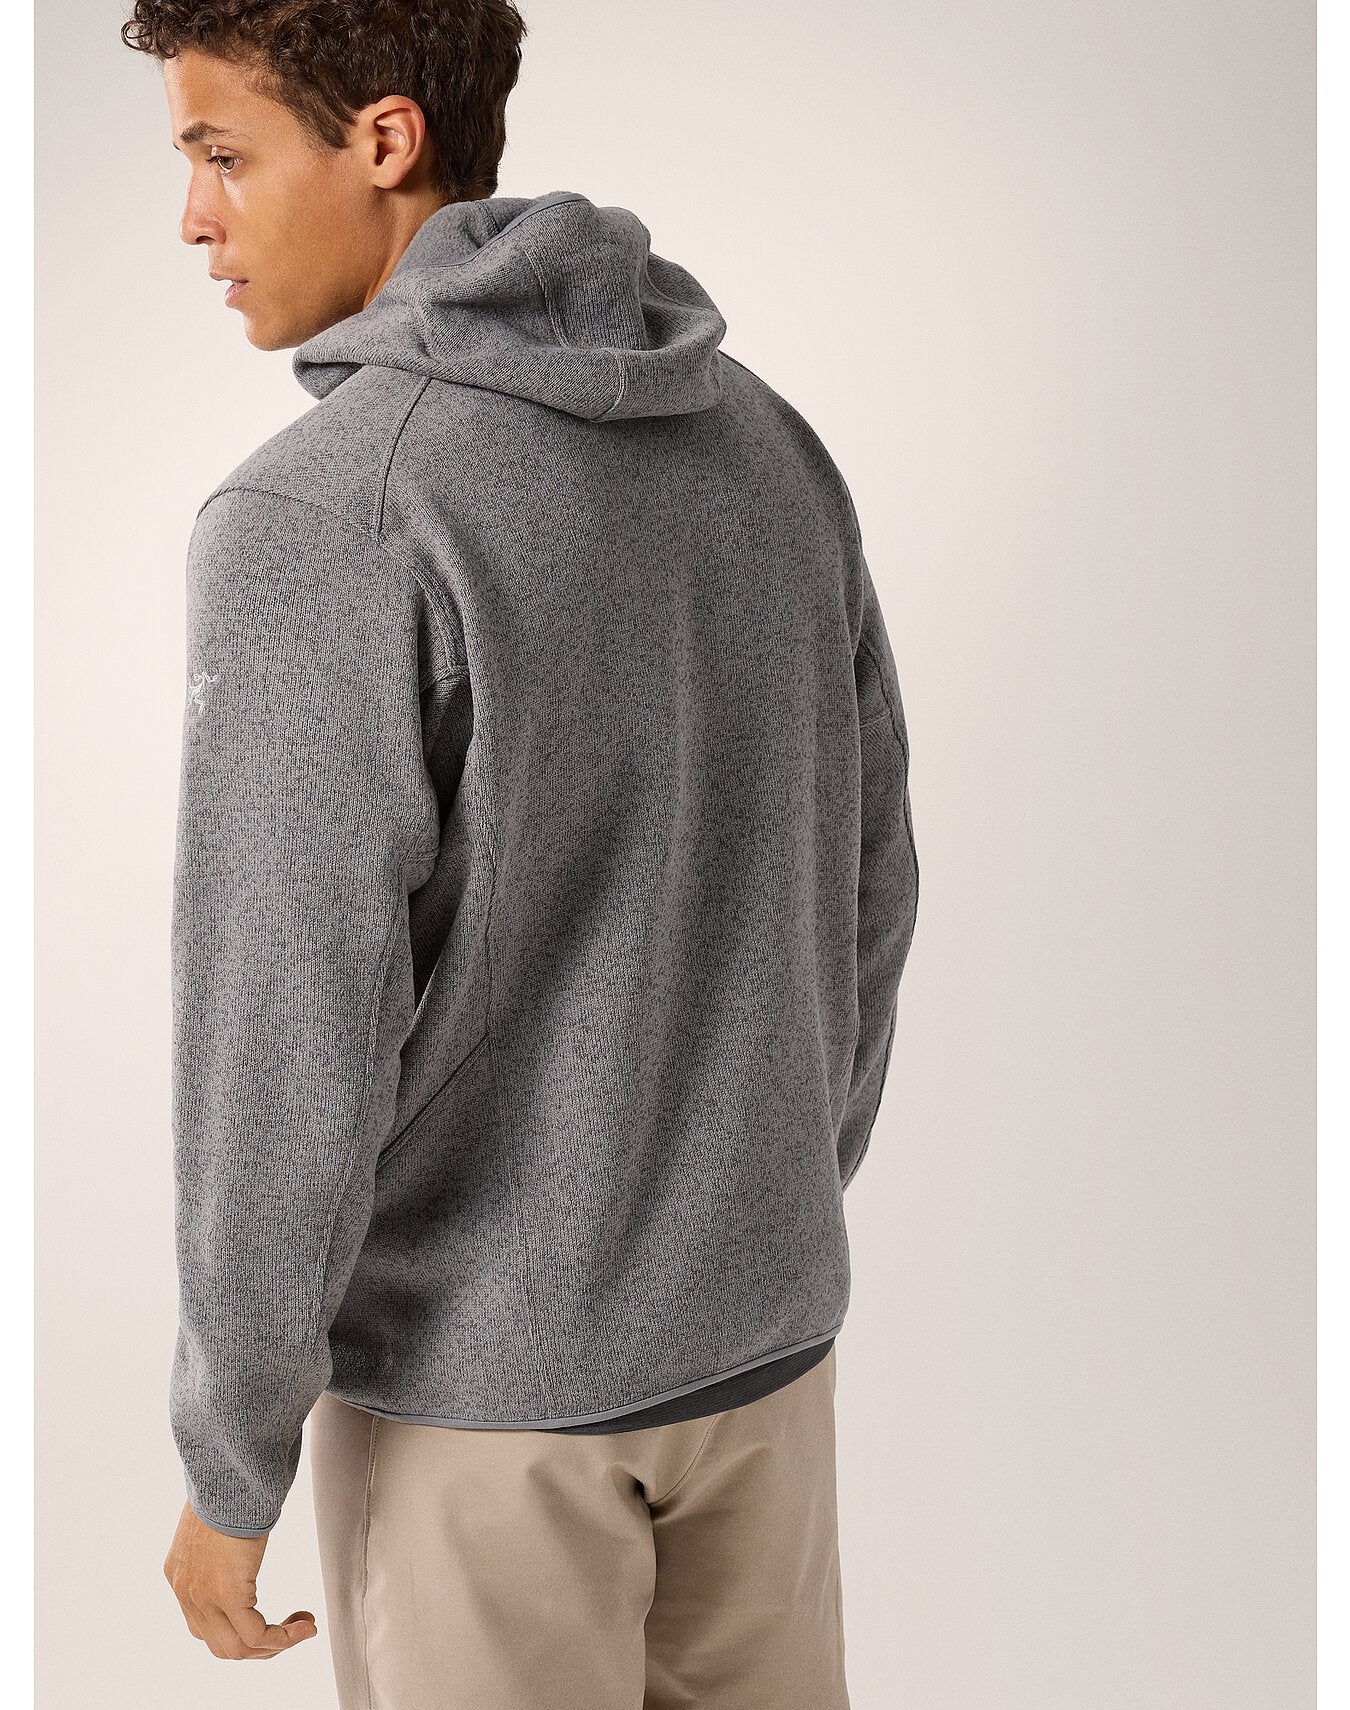 F23-X000005912-Covert-Pullover-Hoody-Void-Heather-Back-View.jpg